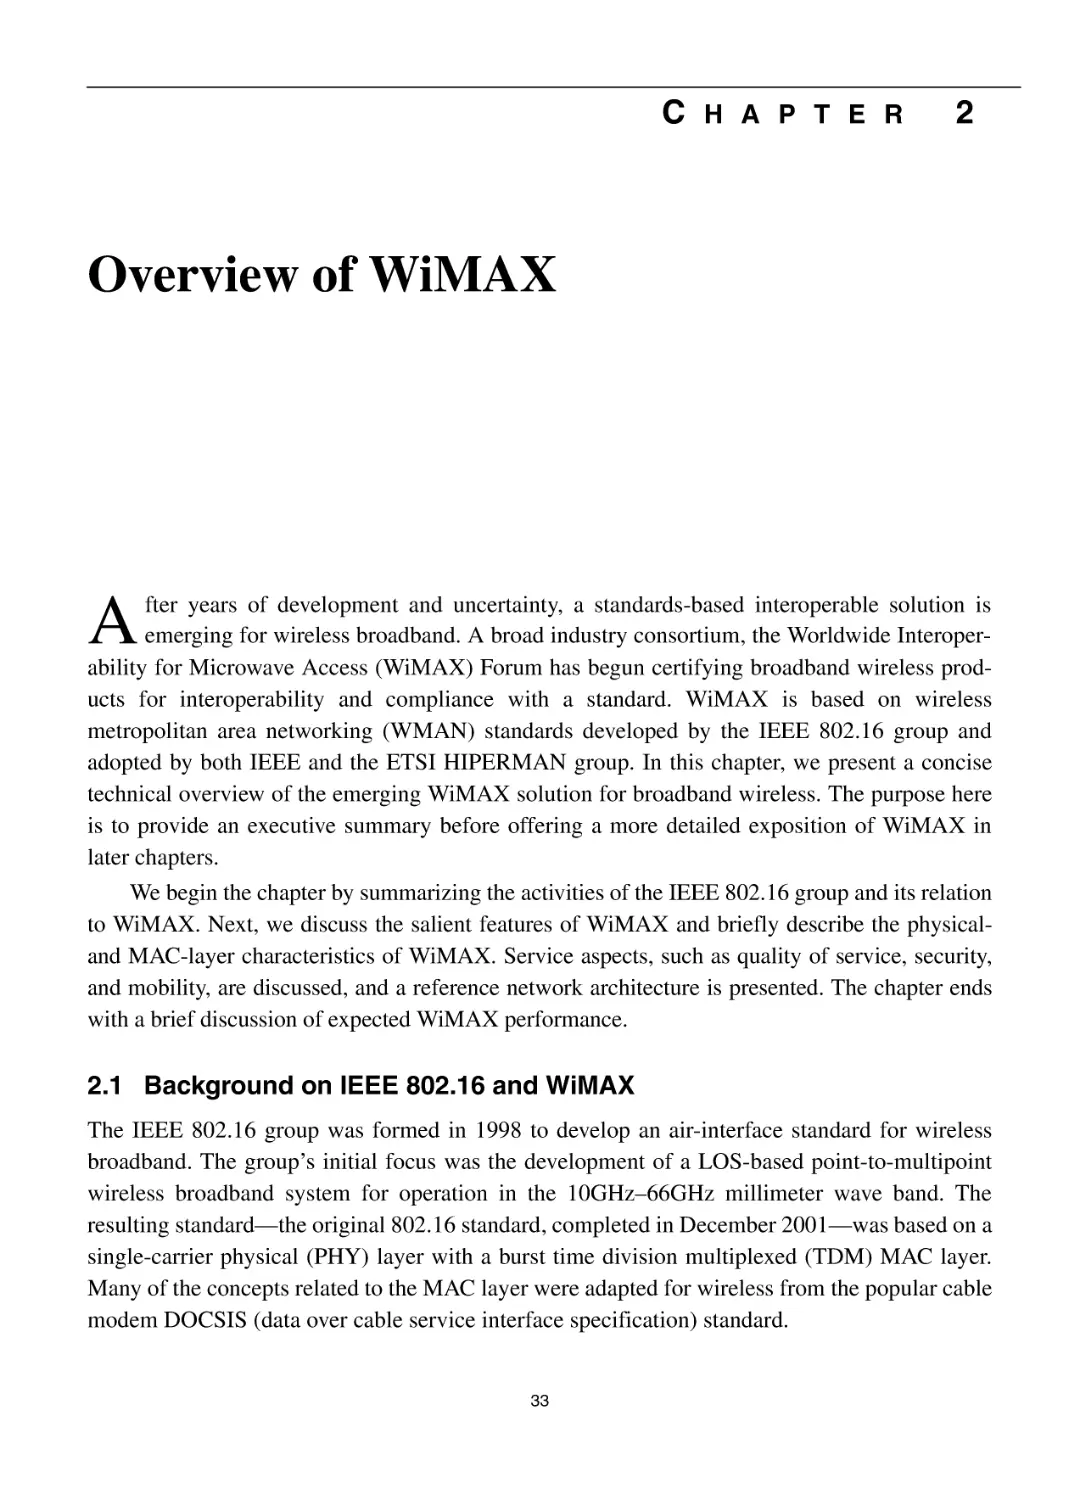 Chapter 2 Overview of WiMAX
2.1 Background on IEEE 802.16 and WiMAX